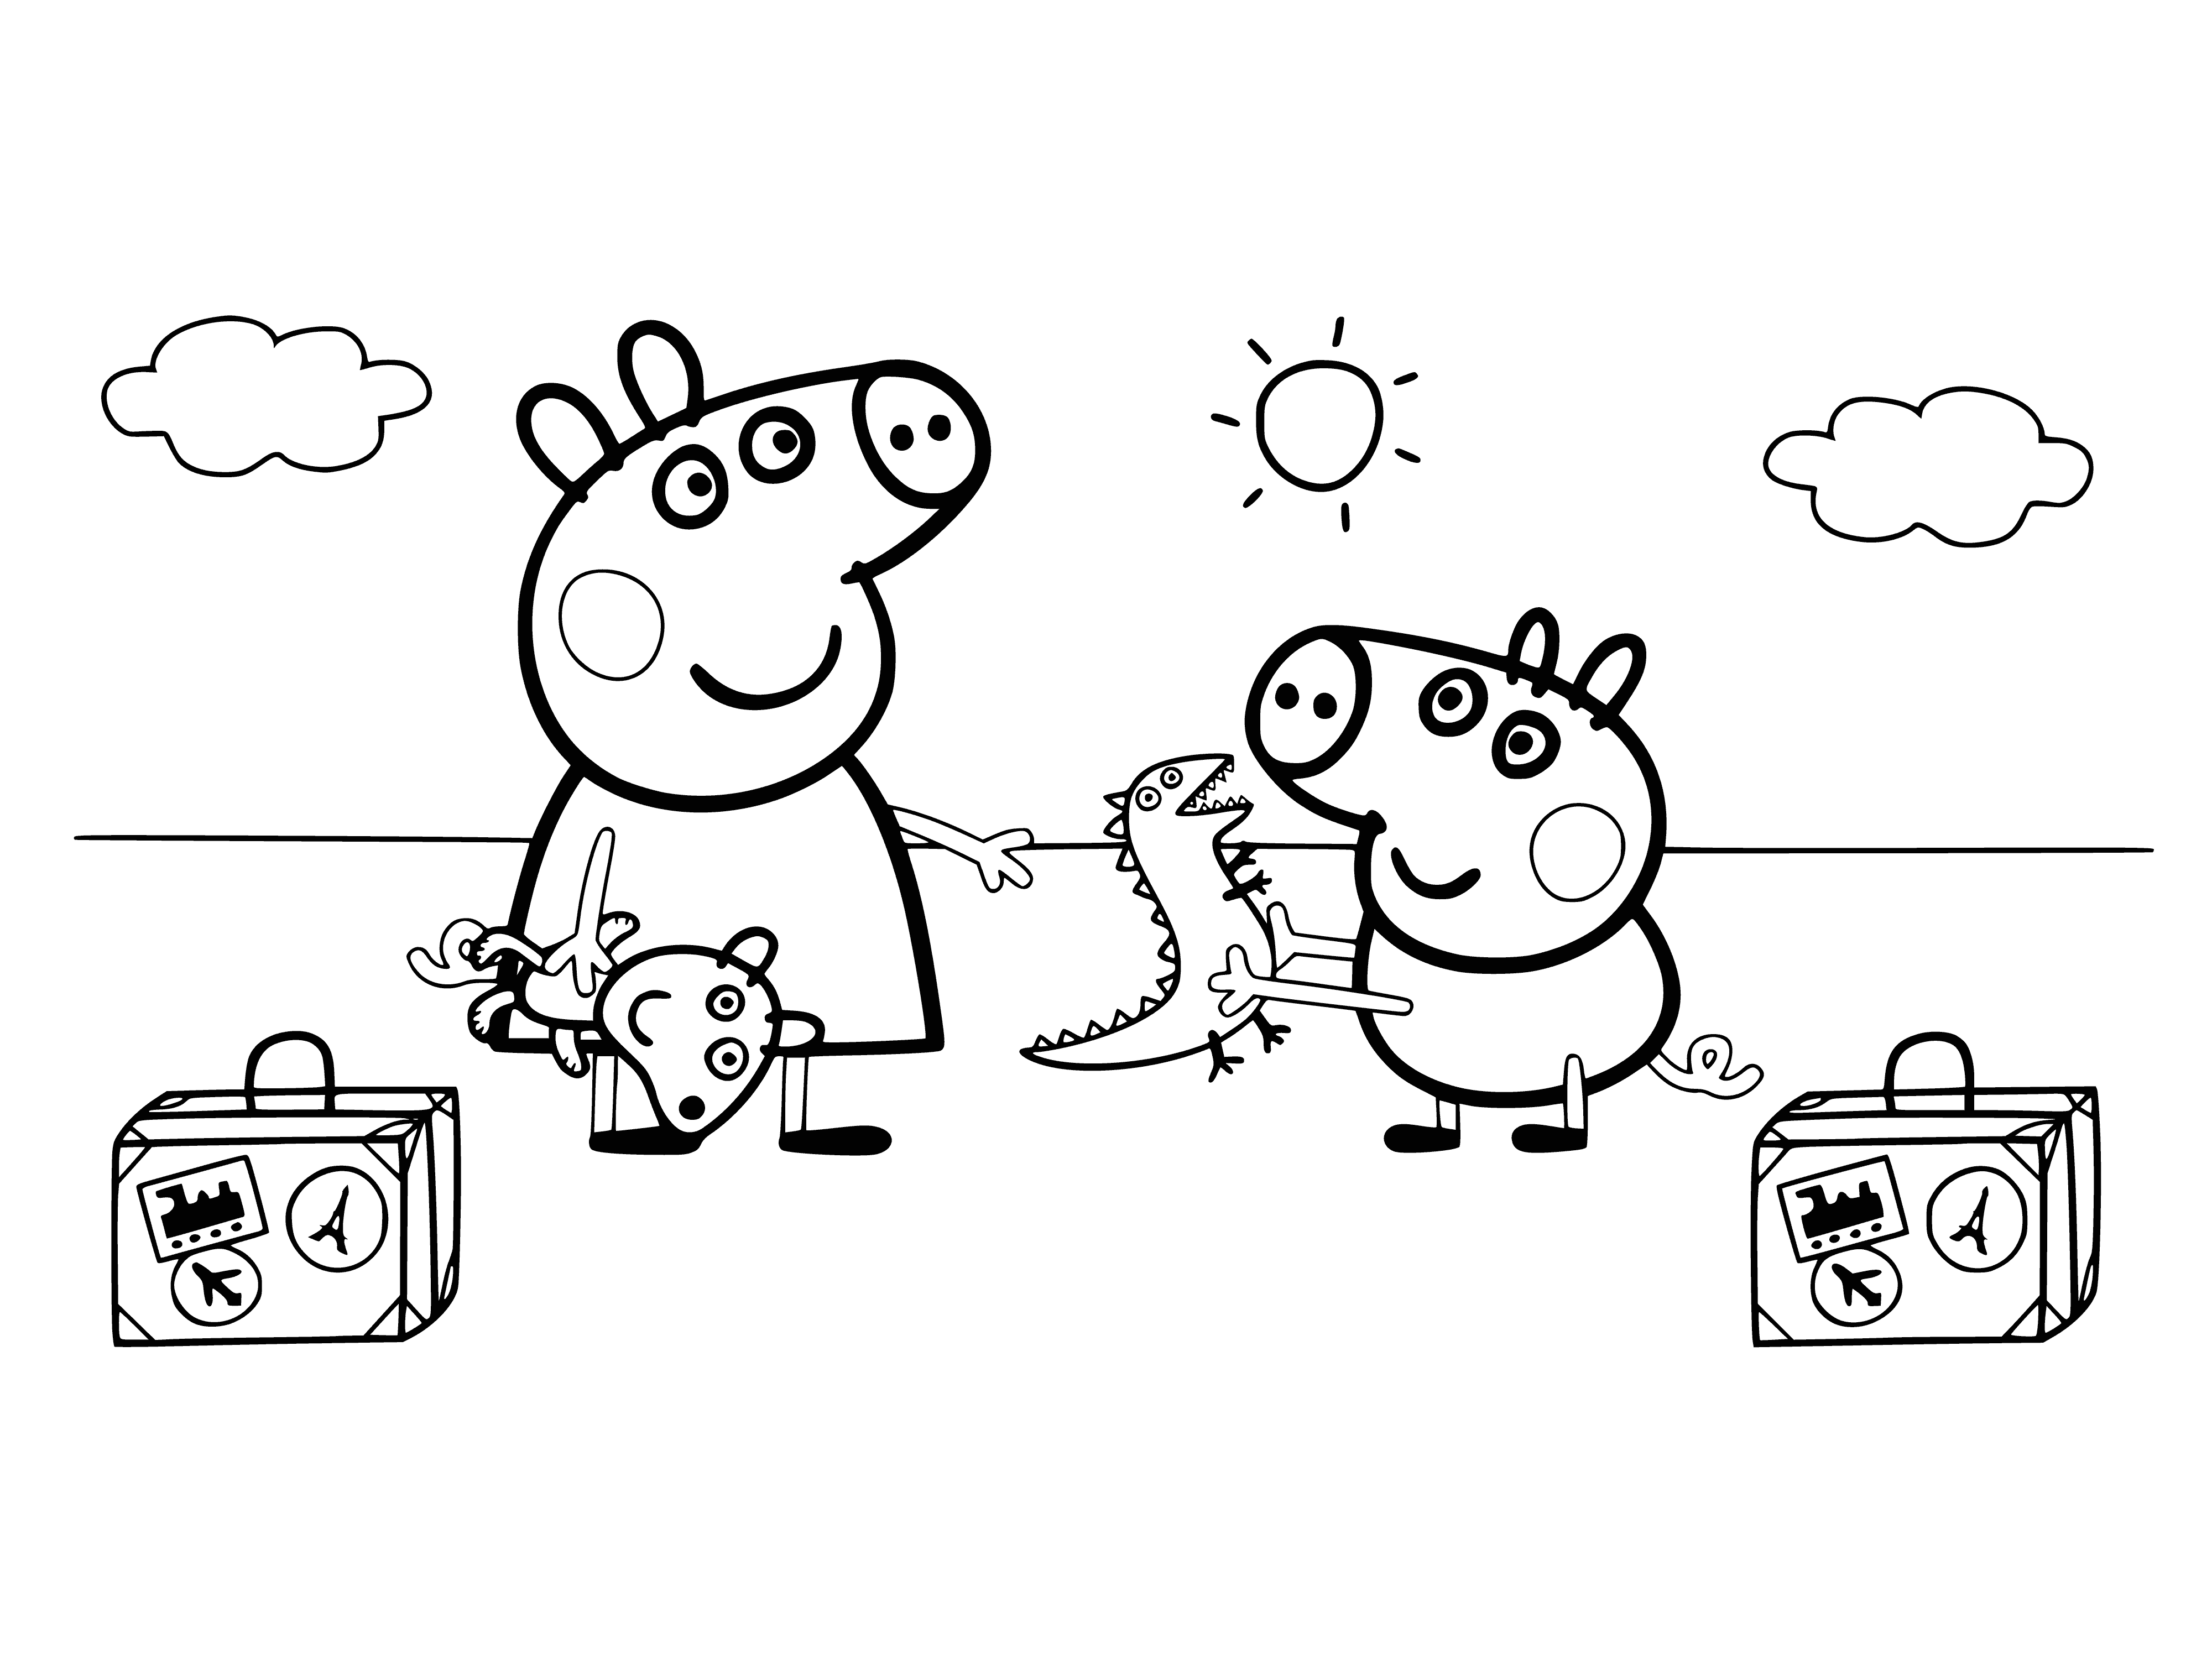 coloring page: Peppa and George are ready for a trip - packed suitcases, coats, and hats on!